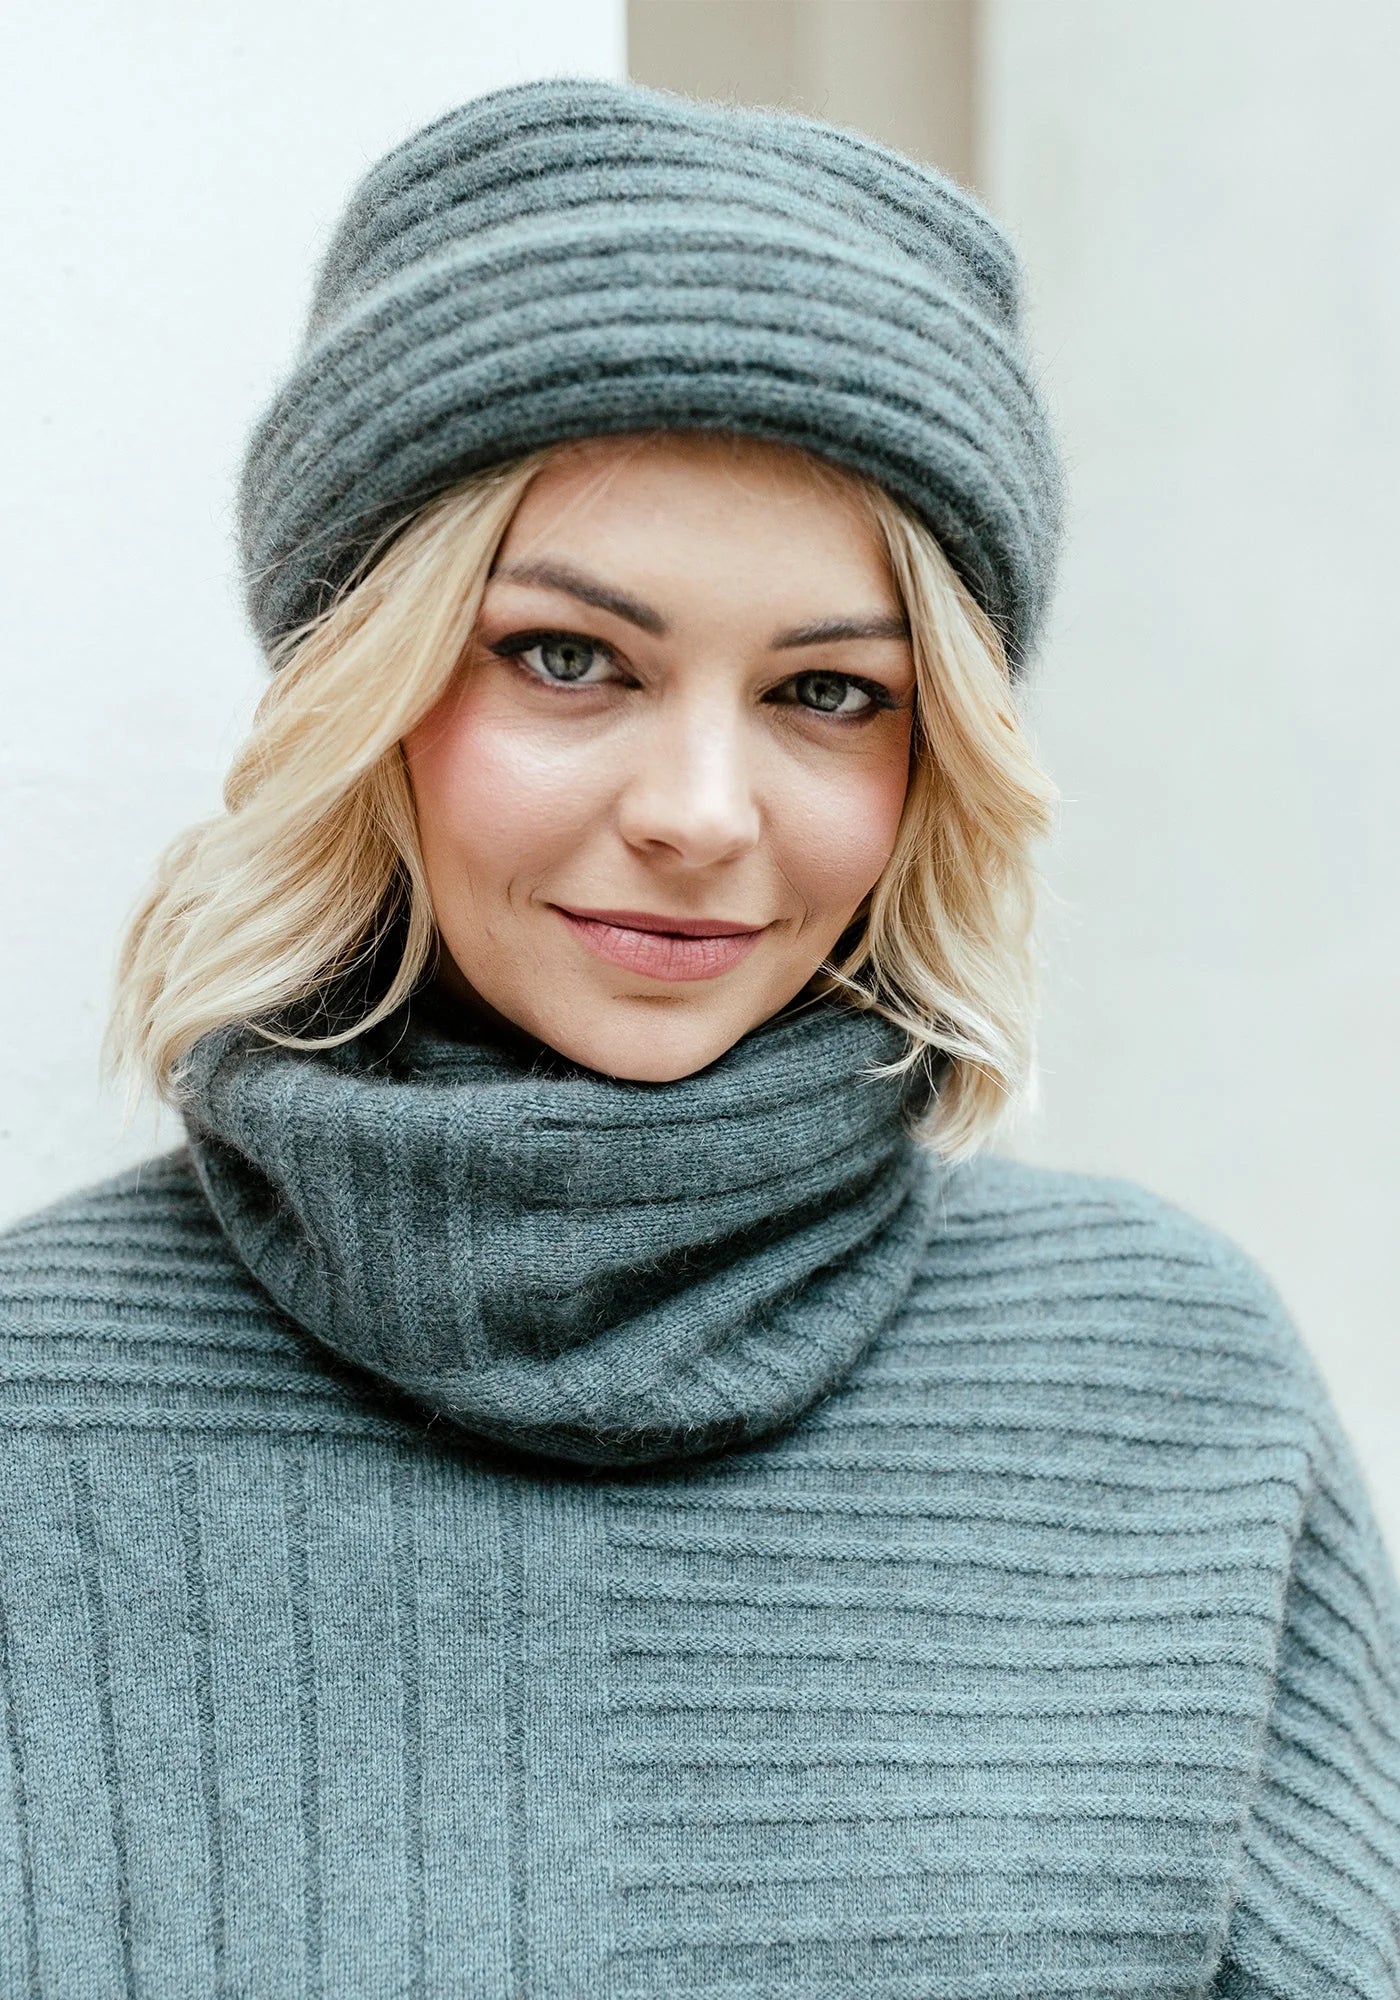 Wrap up in luxury with our Grey Merino Beanie. Crafted for comfort, designed for you. Order now!